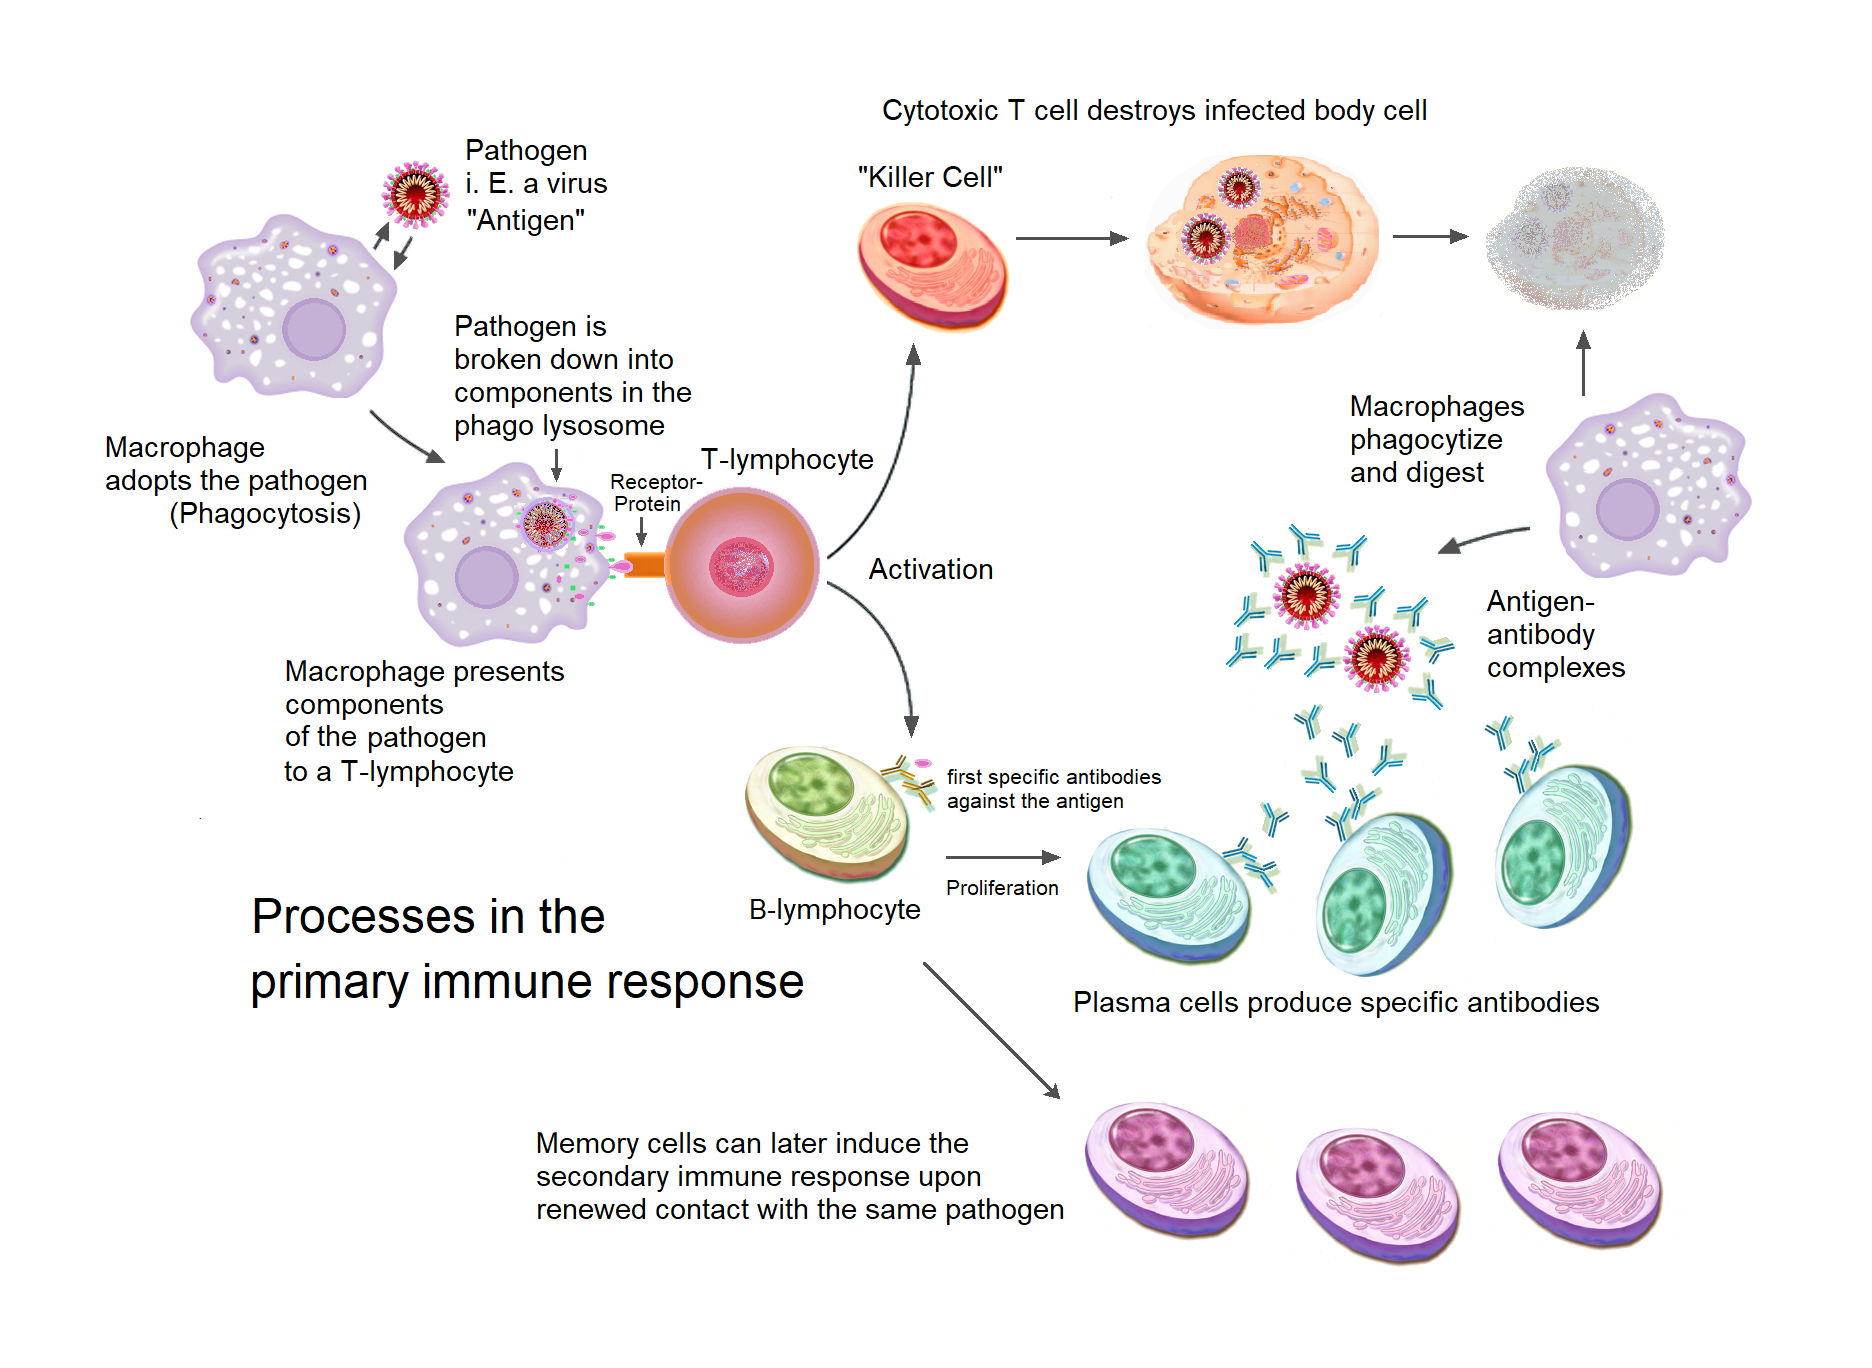 Immune response steps when exposed to a foreign agent - described in the text